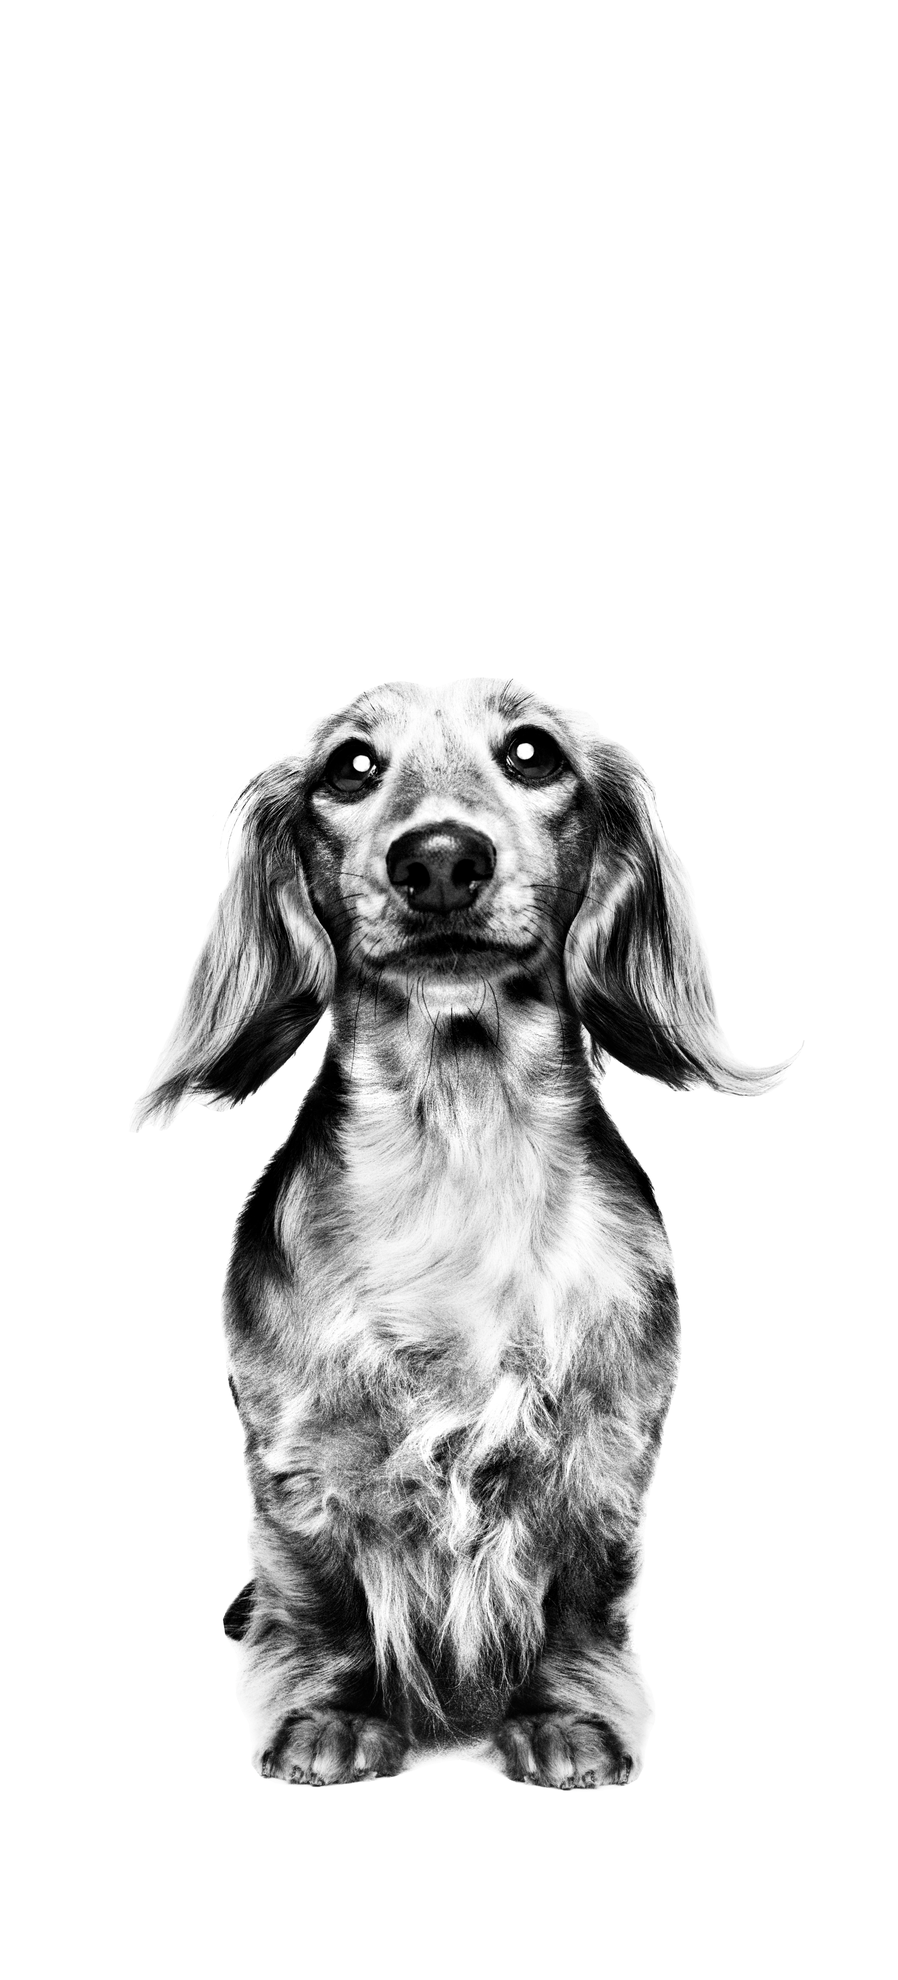 Dachshund adult standing in black and white on a white background